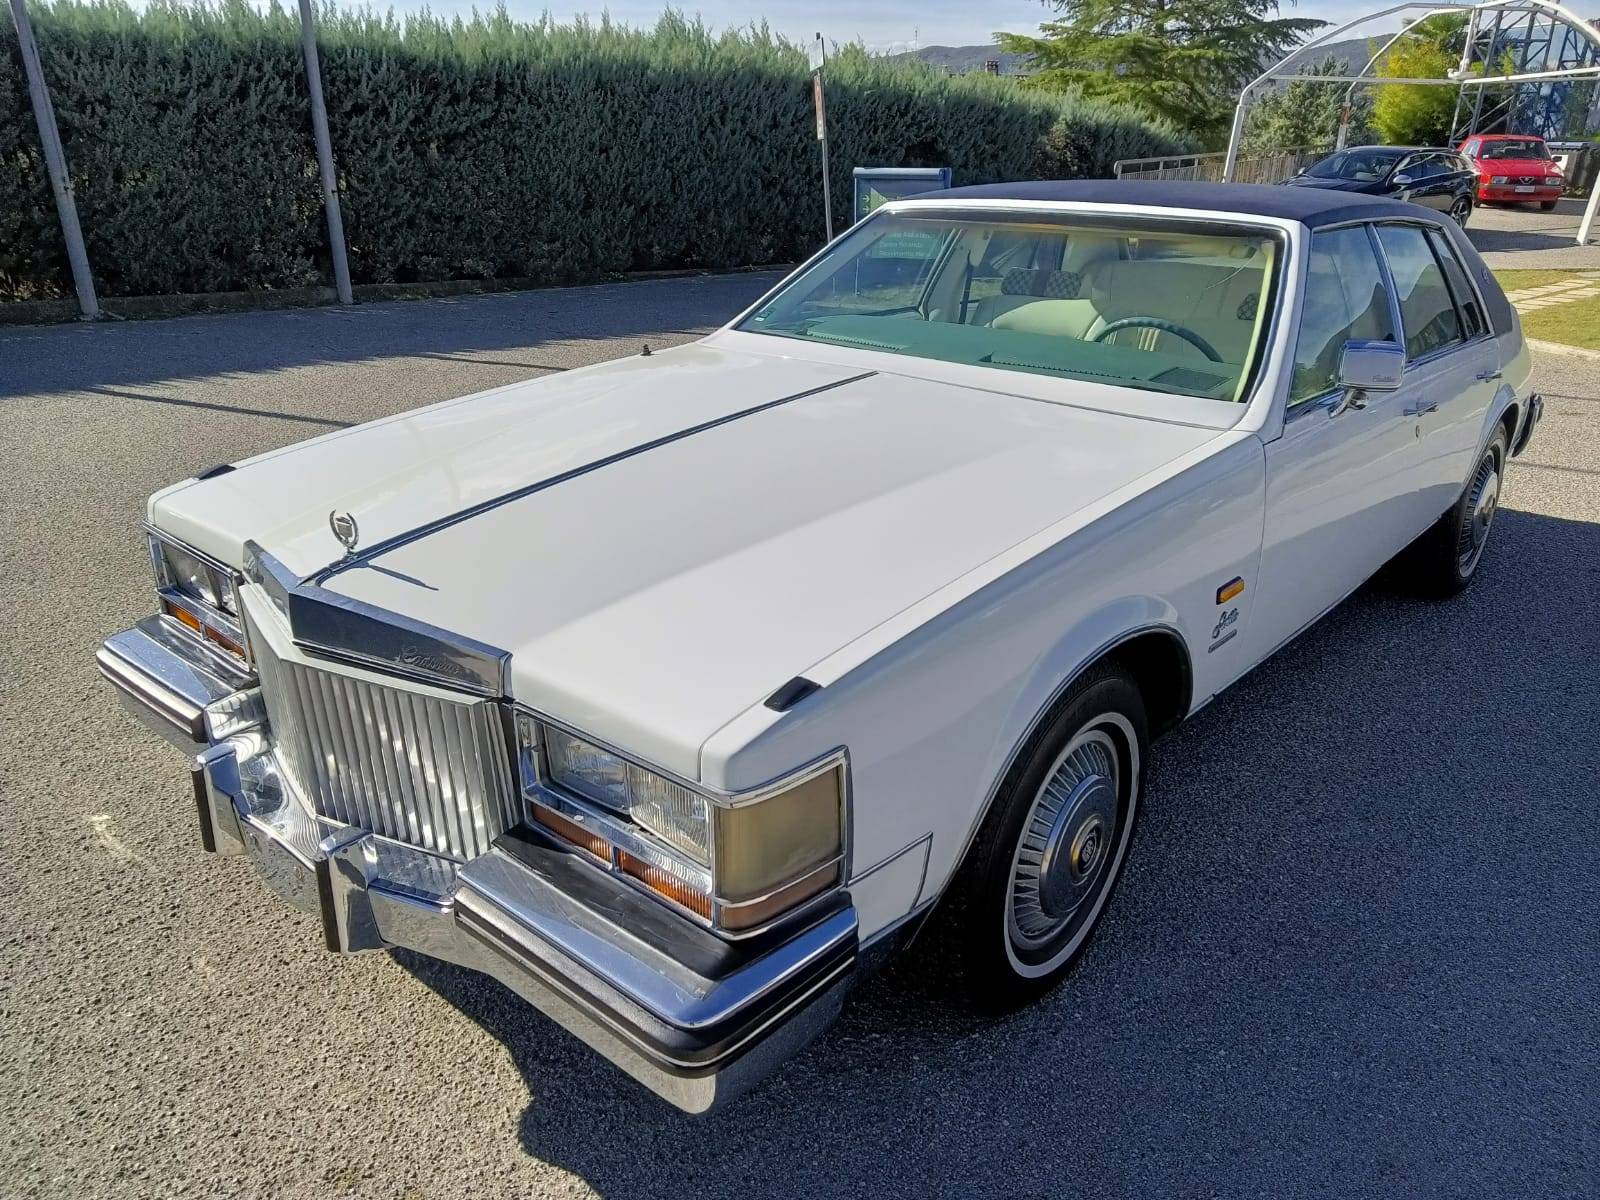 For Sale: Cadillac Seville Sedan  (1980) offered for $13,865